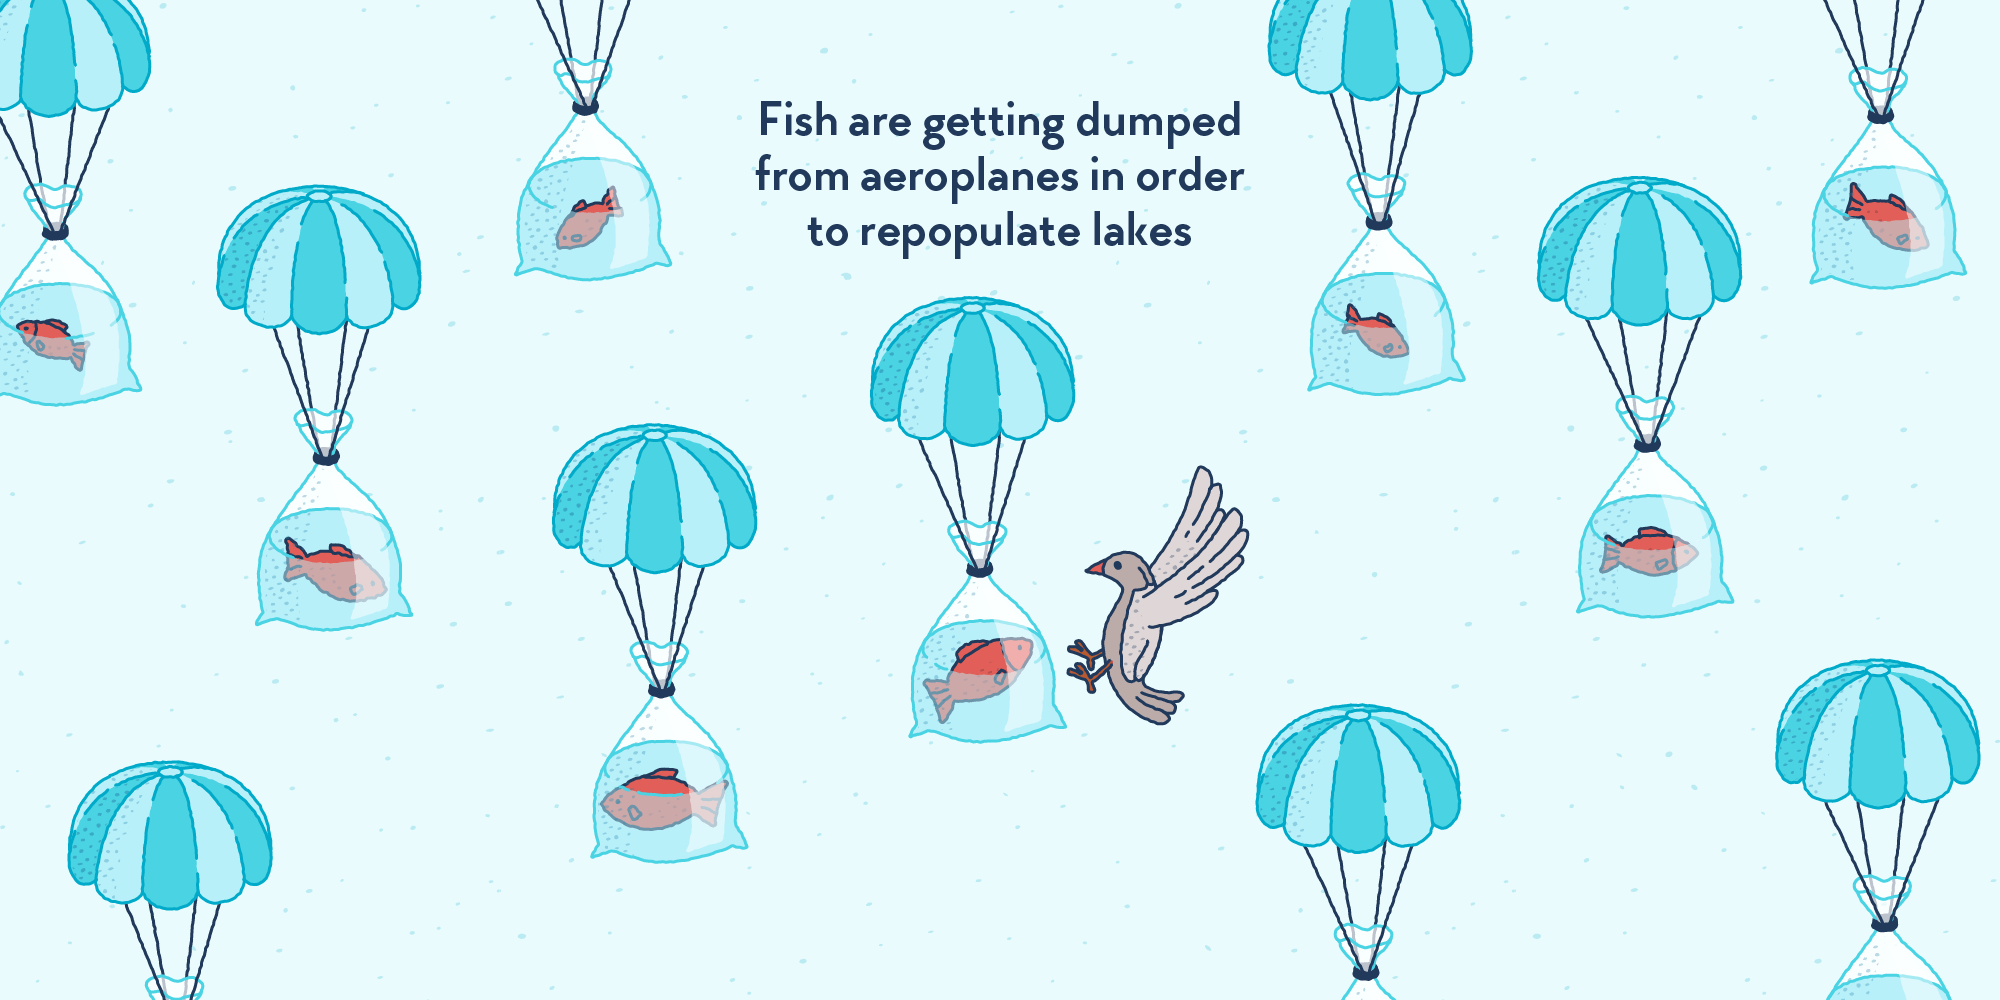 Numerous fish in plastic bags, falling from the sky, each attached to a little parachute.